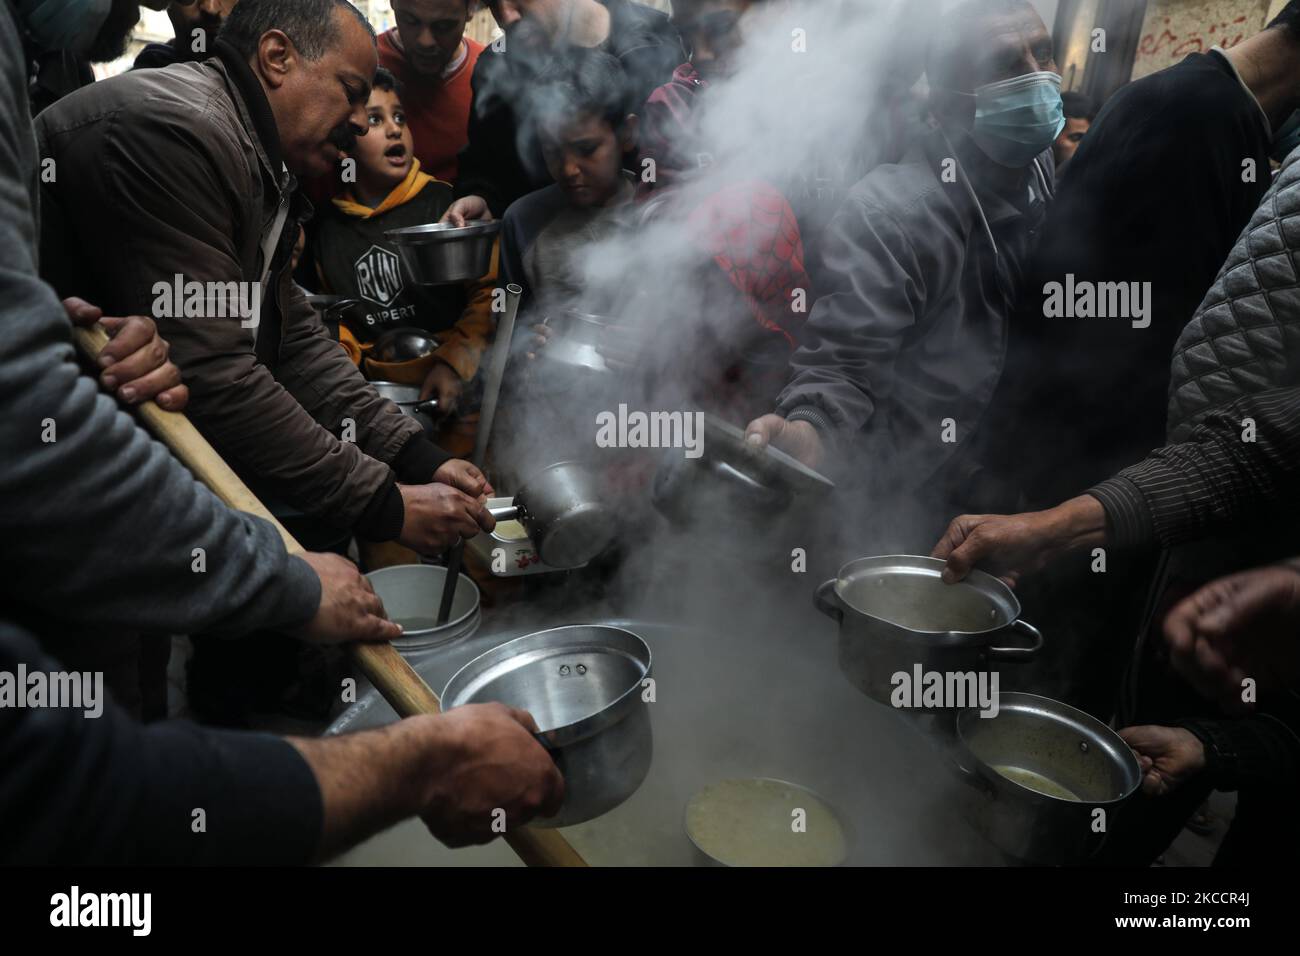 Palestinians gather to get soup offered for free during the Muslim fasting month of Ramadan, in Gaza City on April 13, 2021. (Photo by Majdi Fathi/NurPhoto) Stock Photo